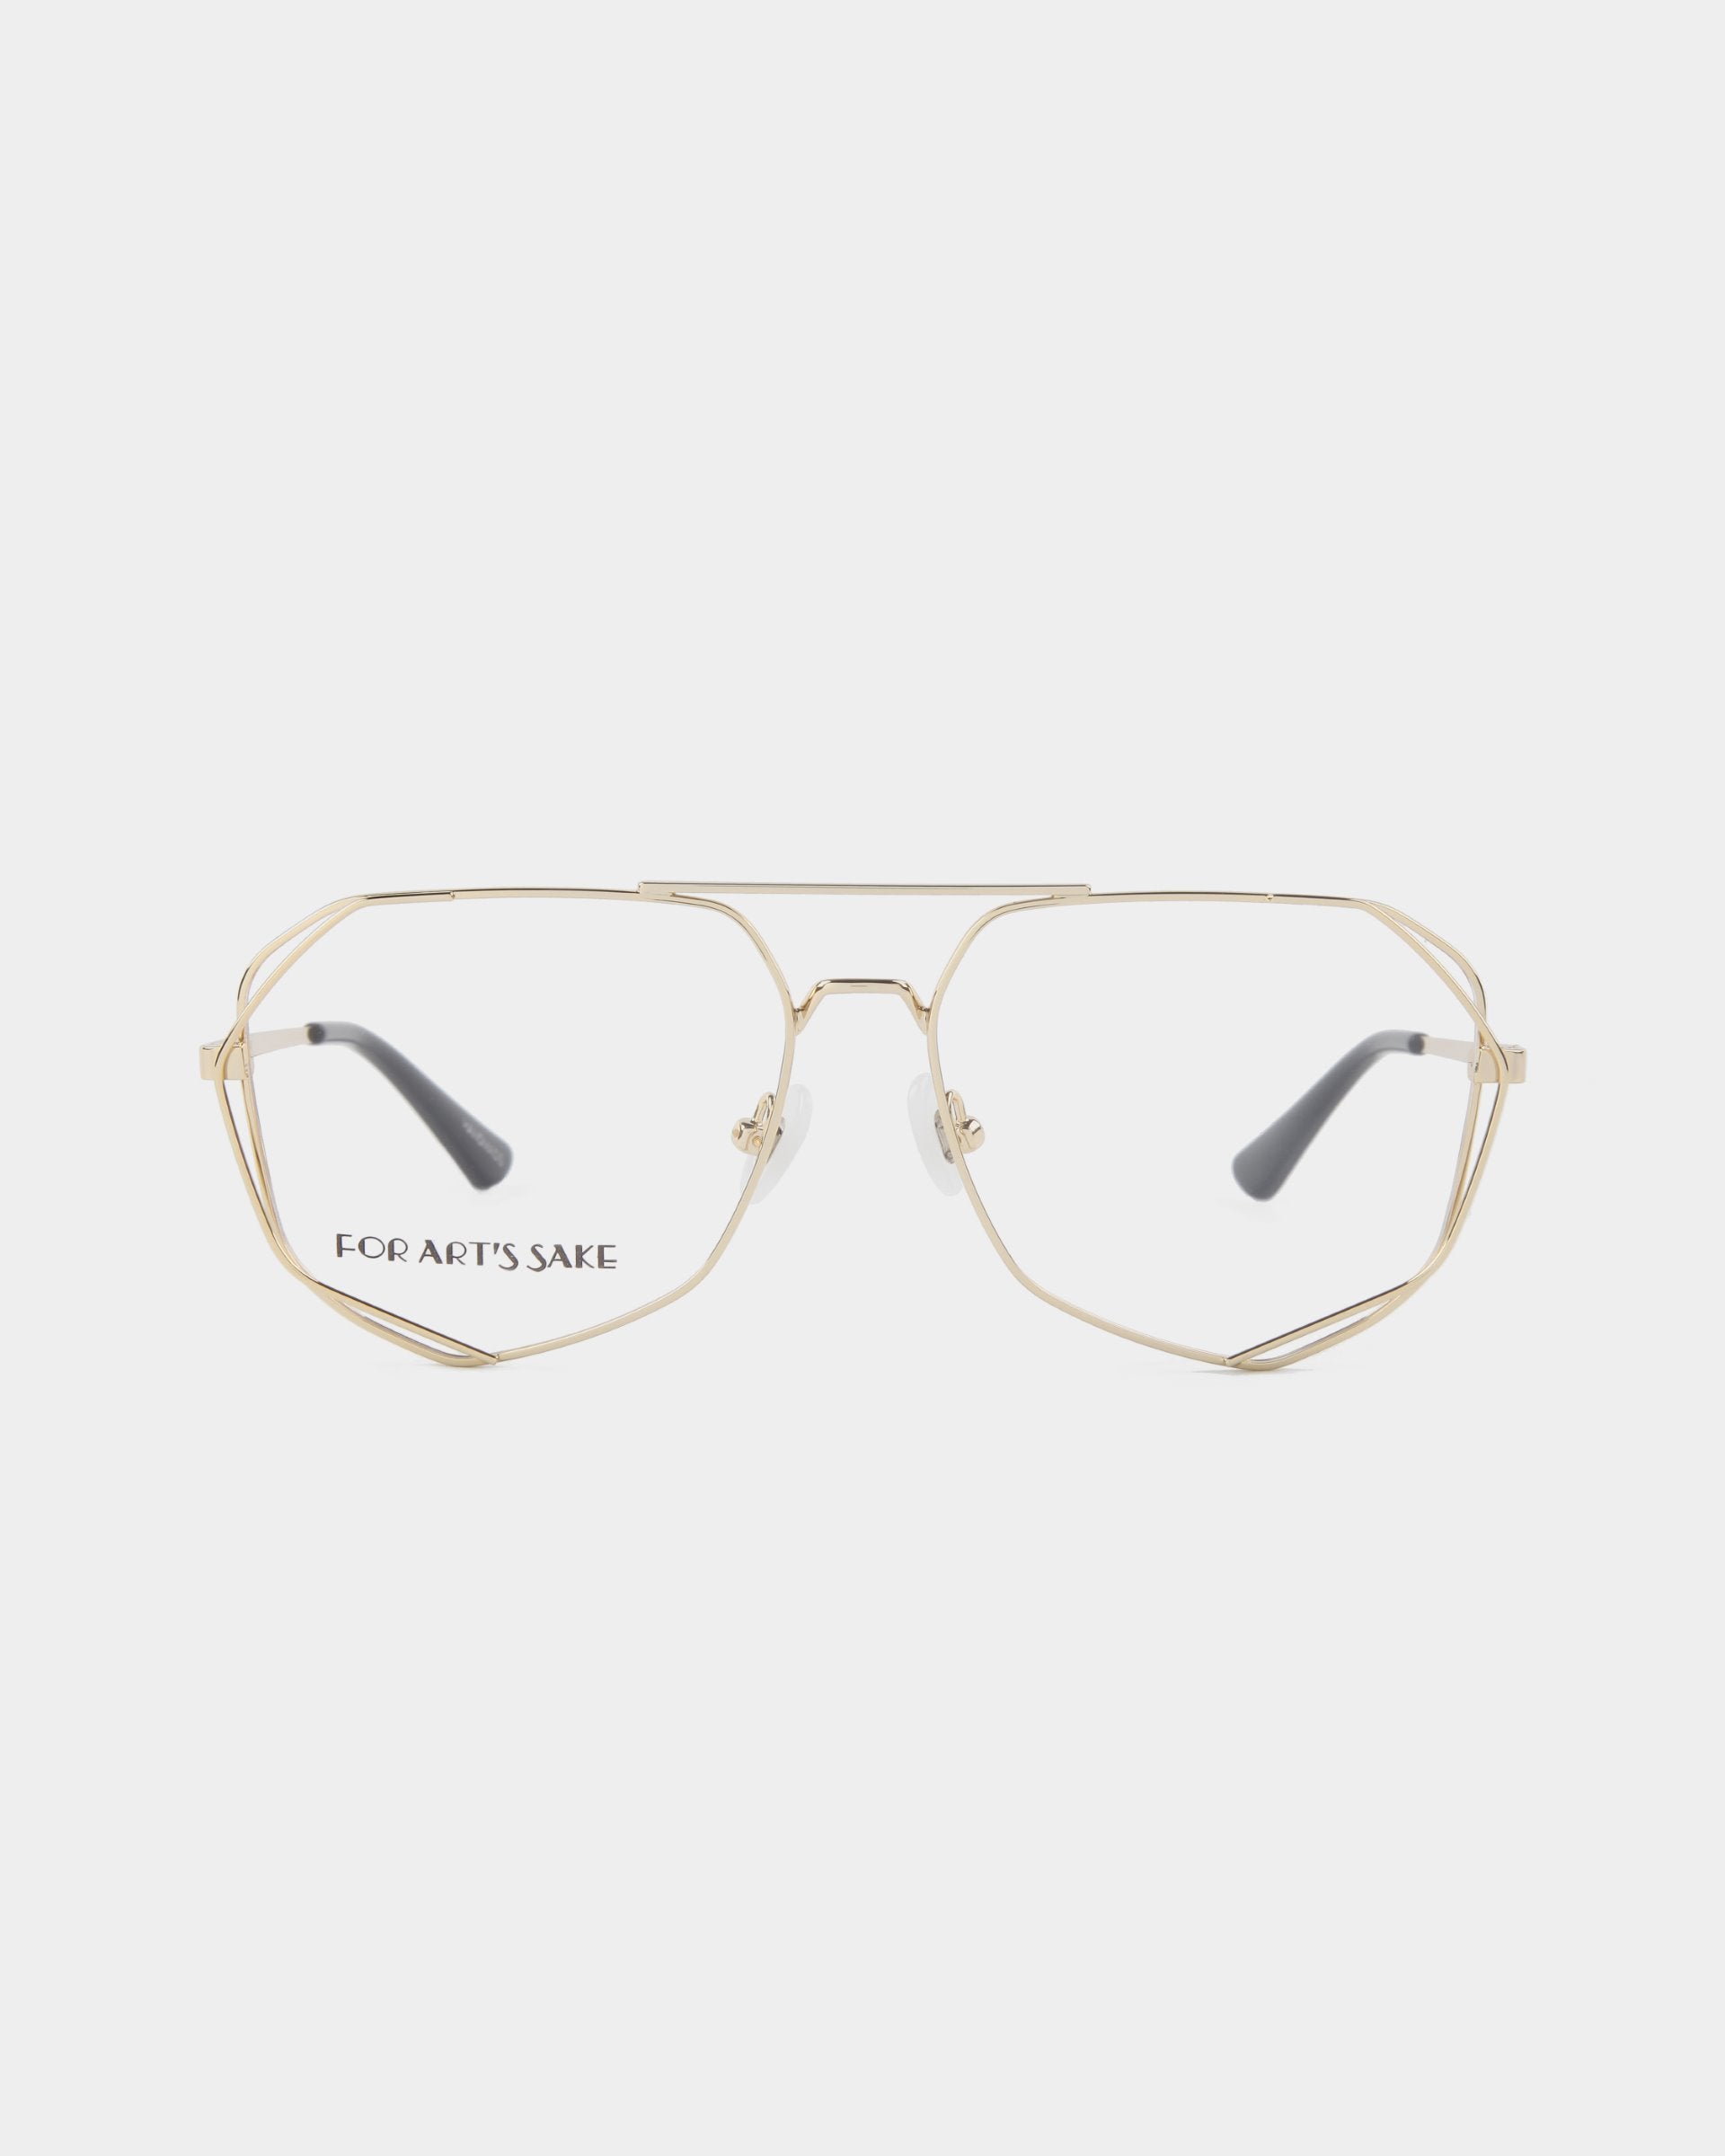 A pair of geometric gold wire-frame eyeglasses with clear lenses, featuring hexagonal rims and black temple tips. The brand name &quot;For Art&#39;s Sake®&quot; is inscribed in black on the inside of the left lens. Crafted with stainless steel frames, they come with an optional Blue Light Filter. The product name is Genius. Background is plain white.